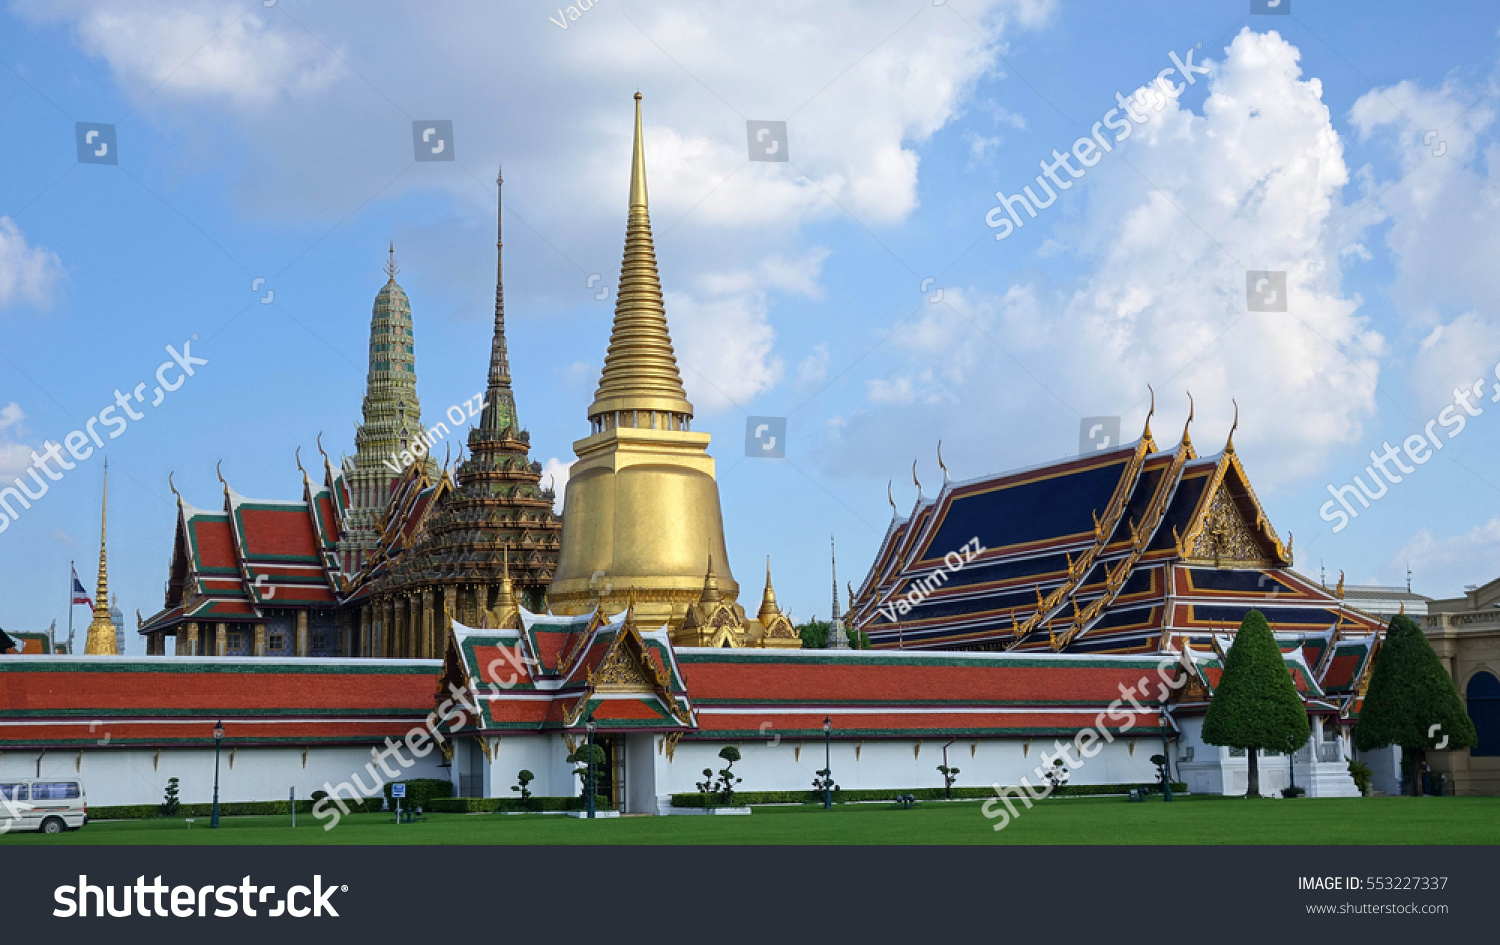 The Grand Palace is a complex of buildings at the heart of Bangkok, Thailand. It's the one of the most popular tourist attractions in Thailand.                        #553227337